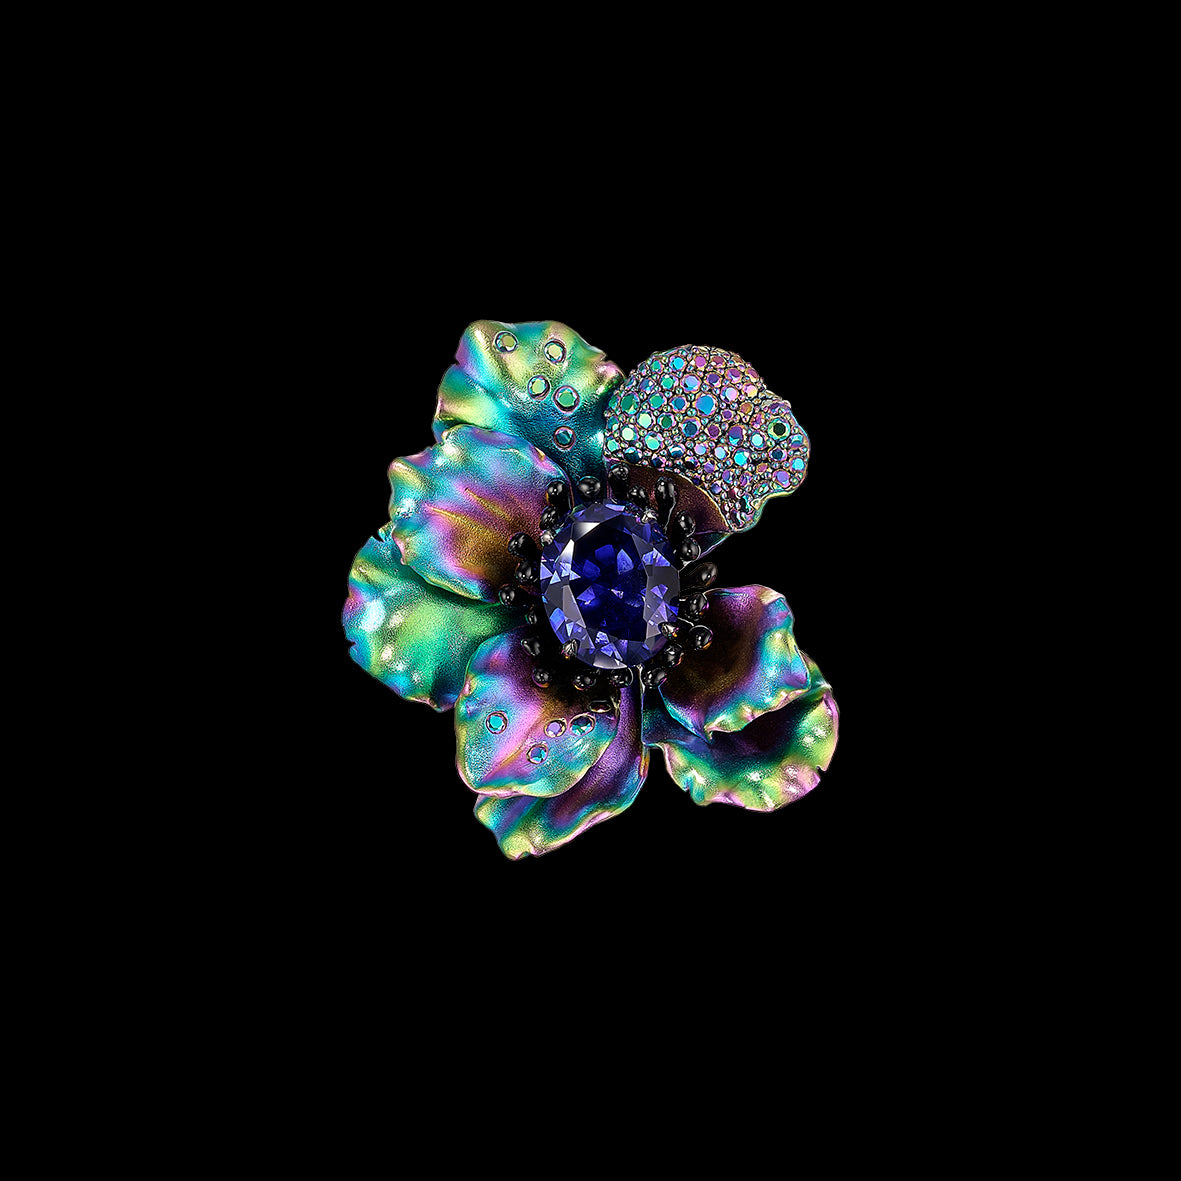 Rainbow Sapphire Poppy Brooch, Brooch, Anabela Chan Joaillerie - Fine jewelry with laboratory grown and created gemstones hand-crafted in the United Kingdom. Anabela Chan Joaillerie is the first fine jewellery brand in the world to champion laboratory-grown and created gemstones with high jewellery design, artisanal craftsmanship and a focus on ethical and sustainable innovations.